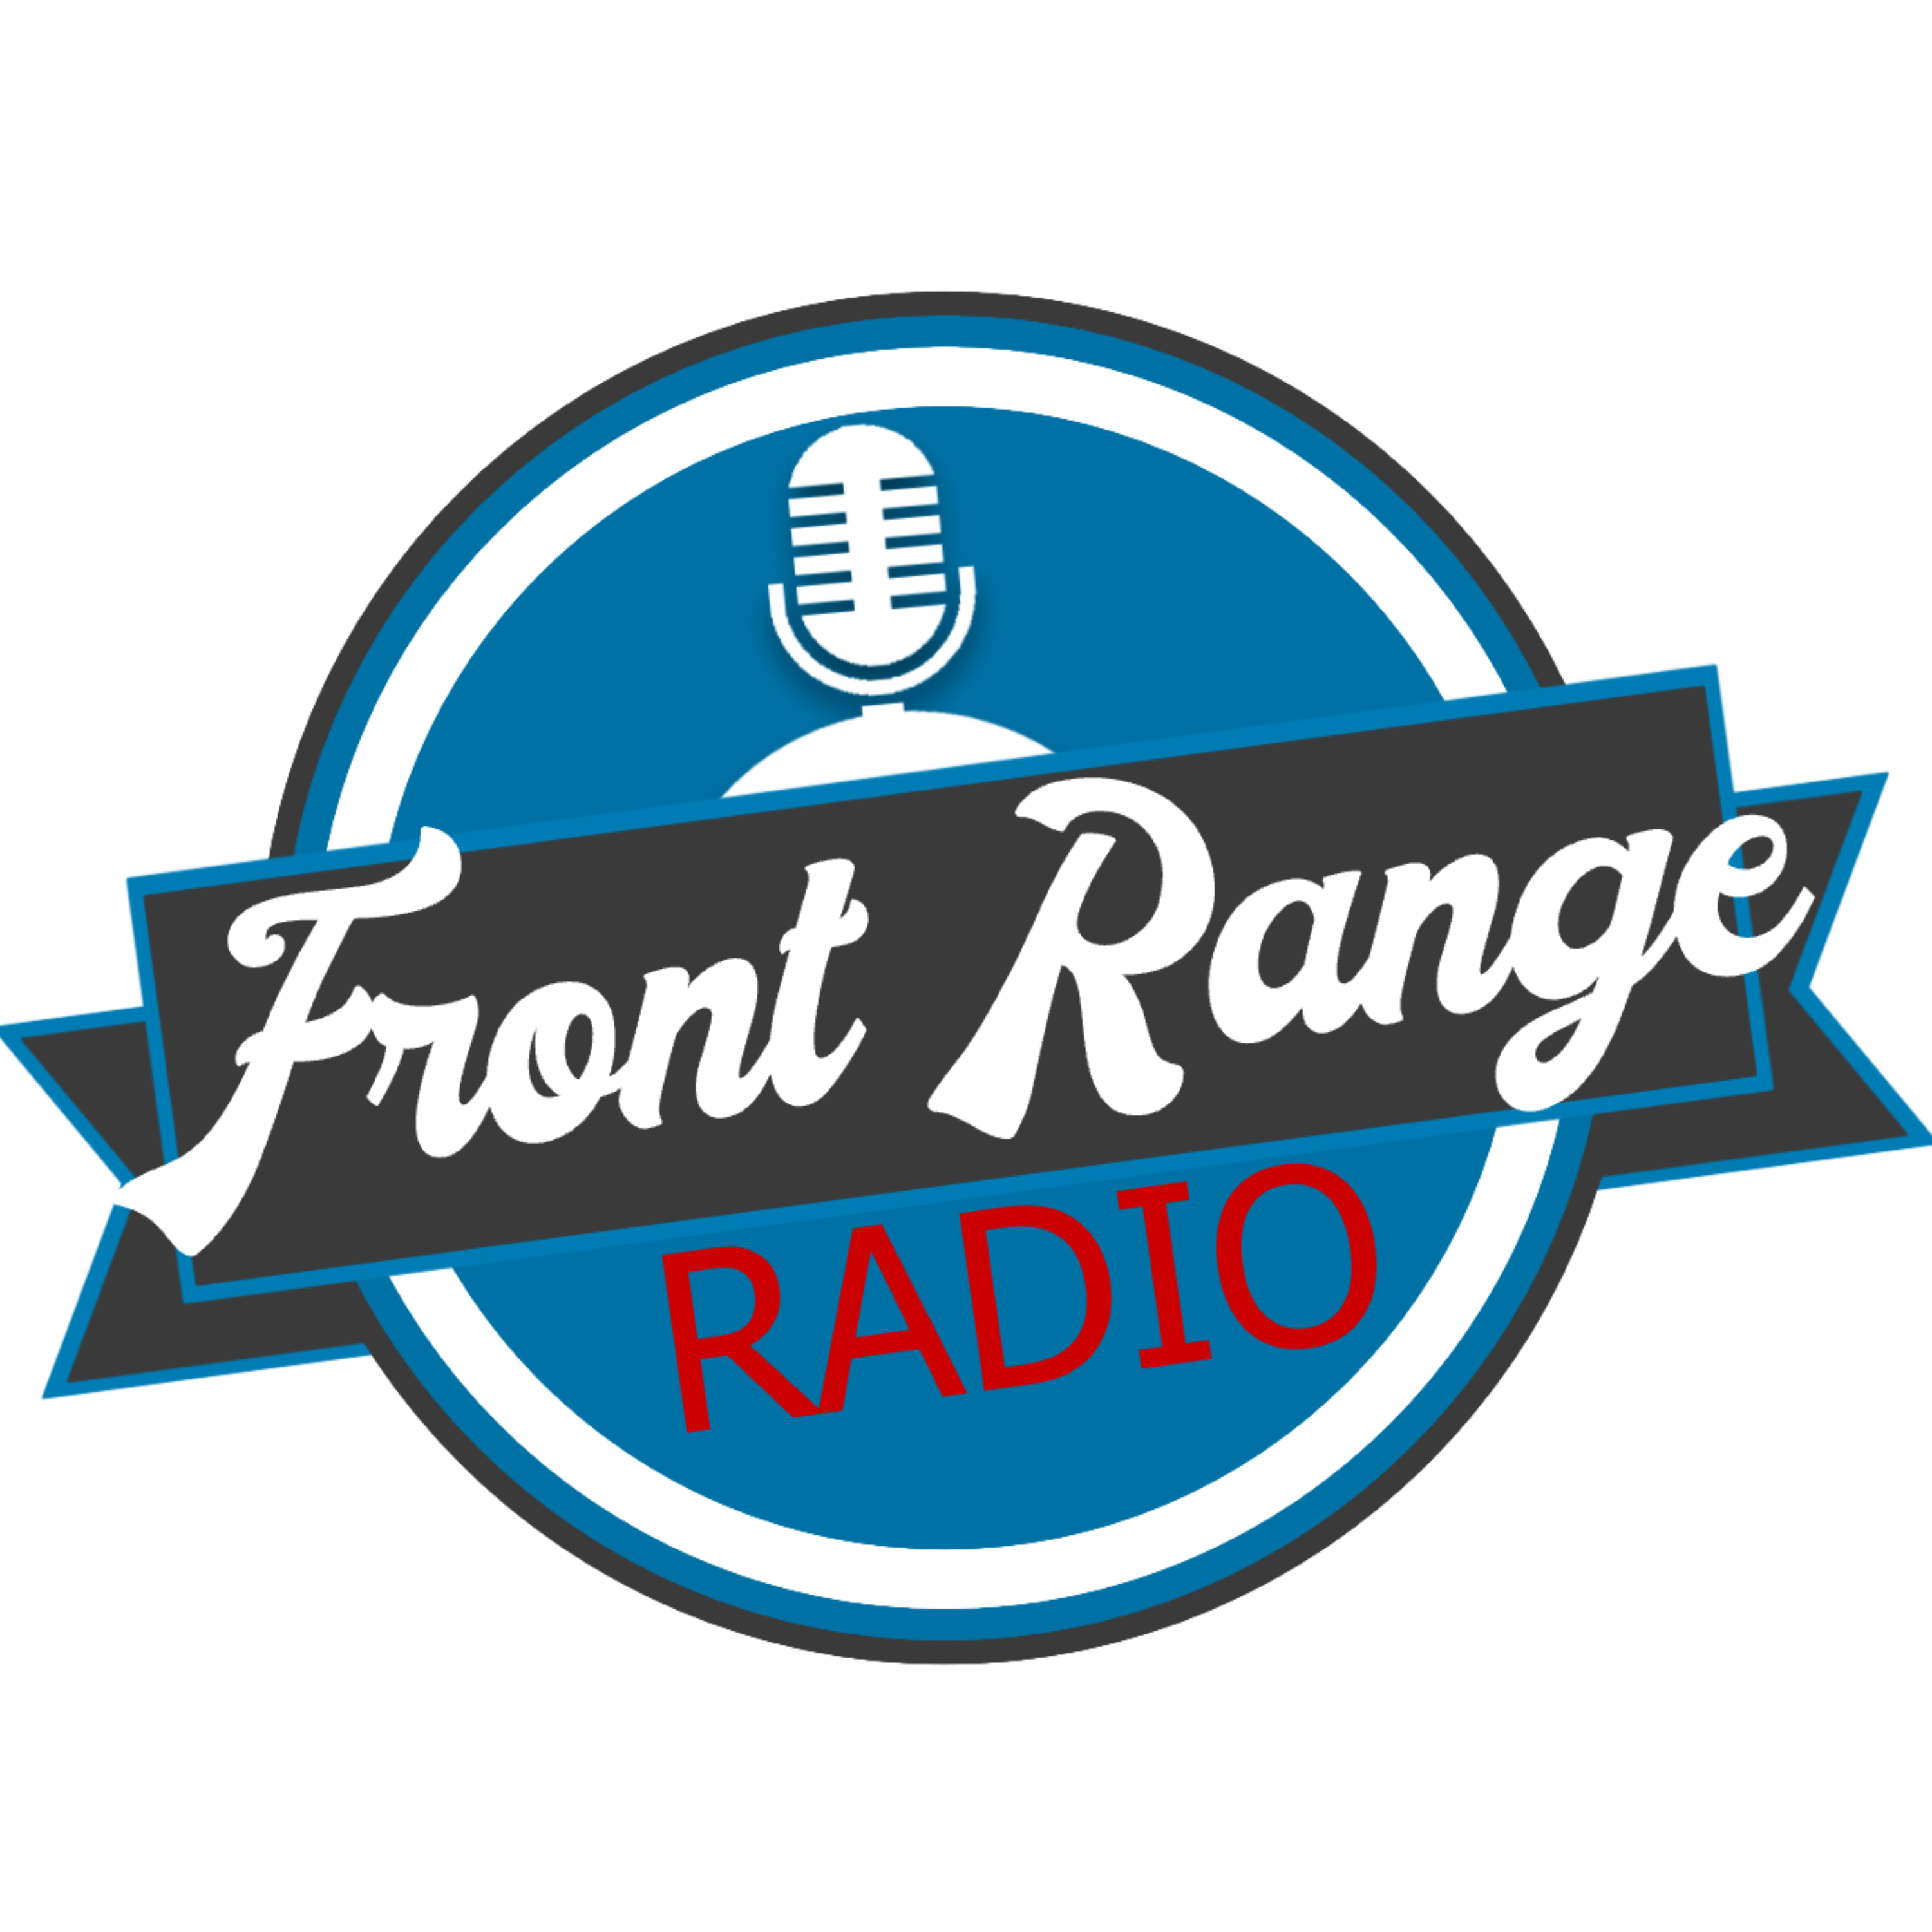 Art for Tune In 100% by Front Range Radio